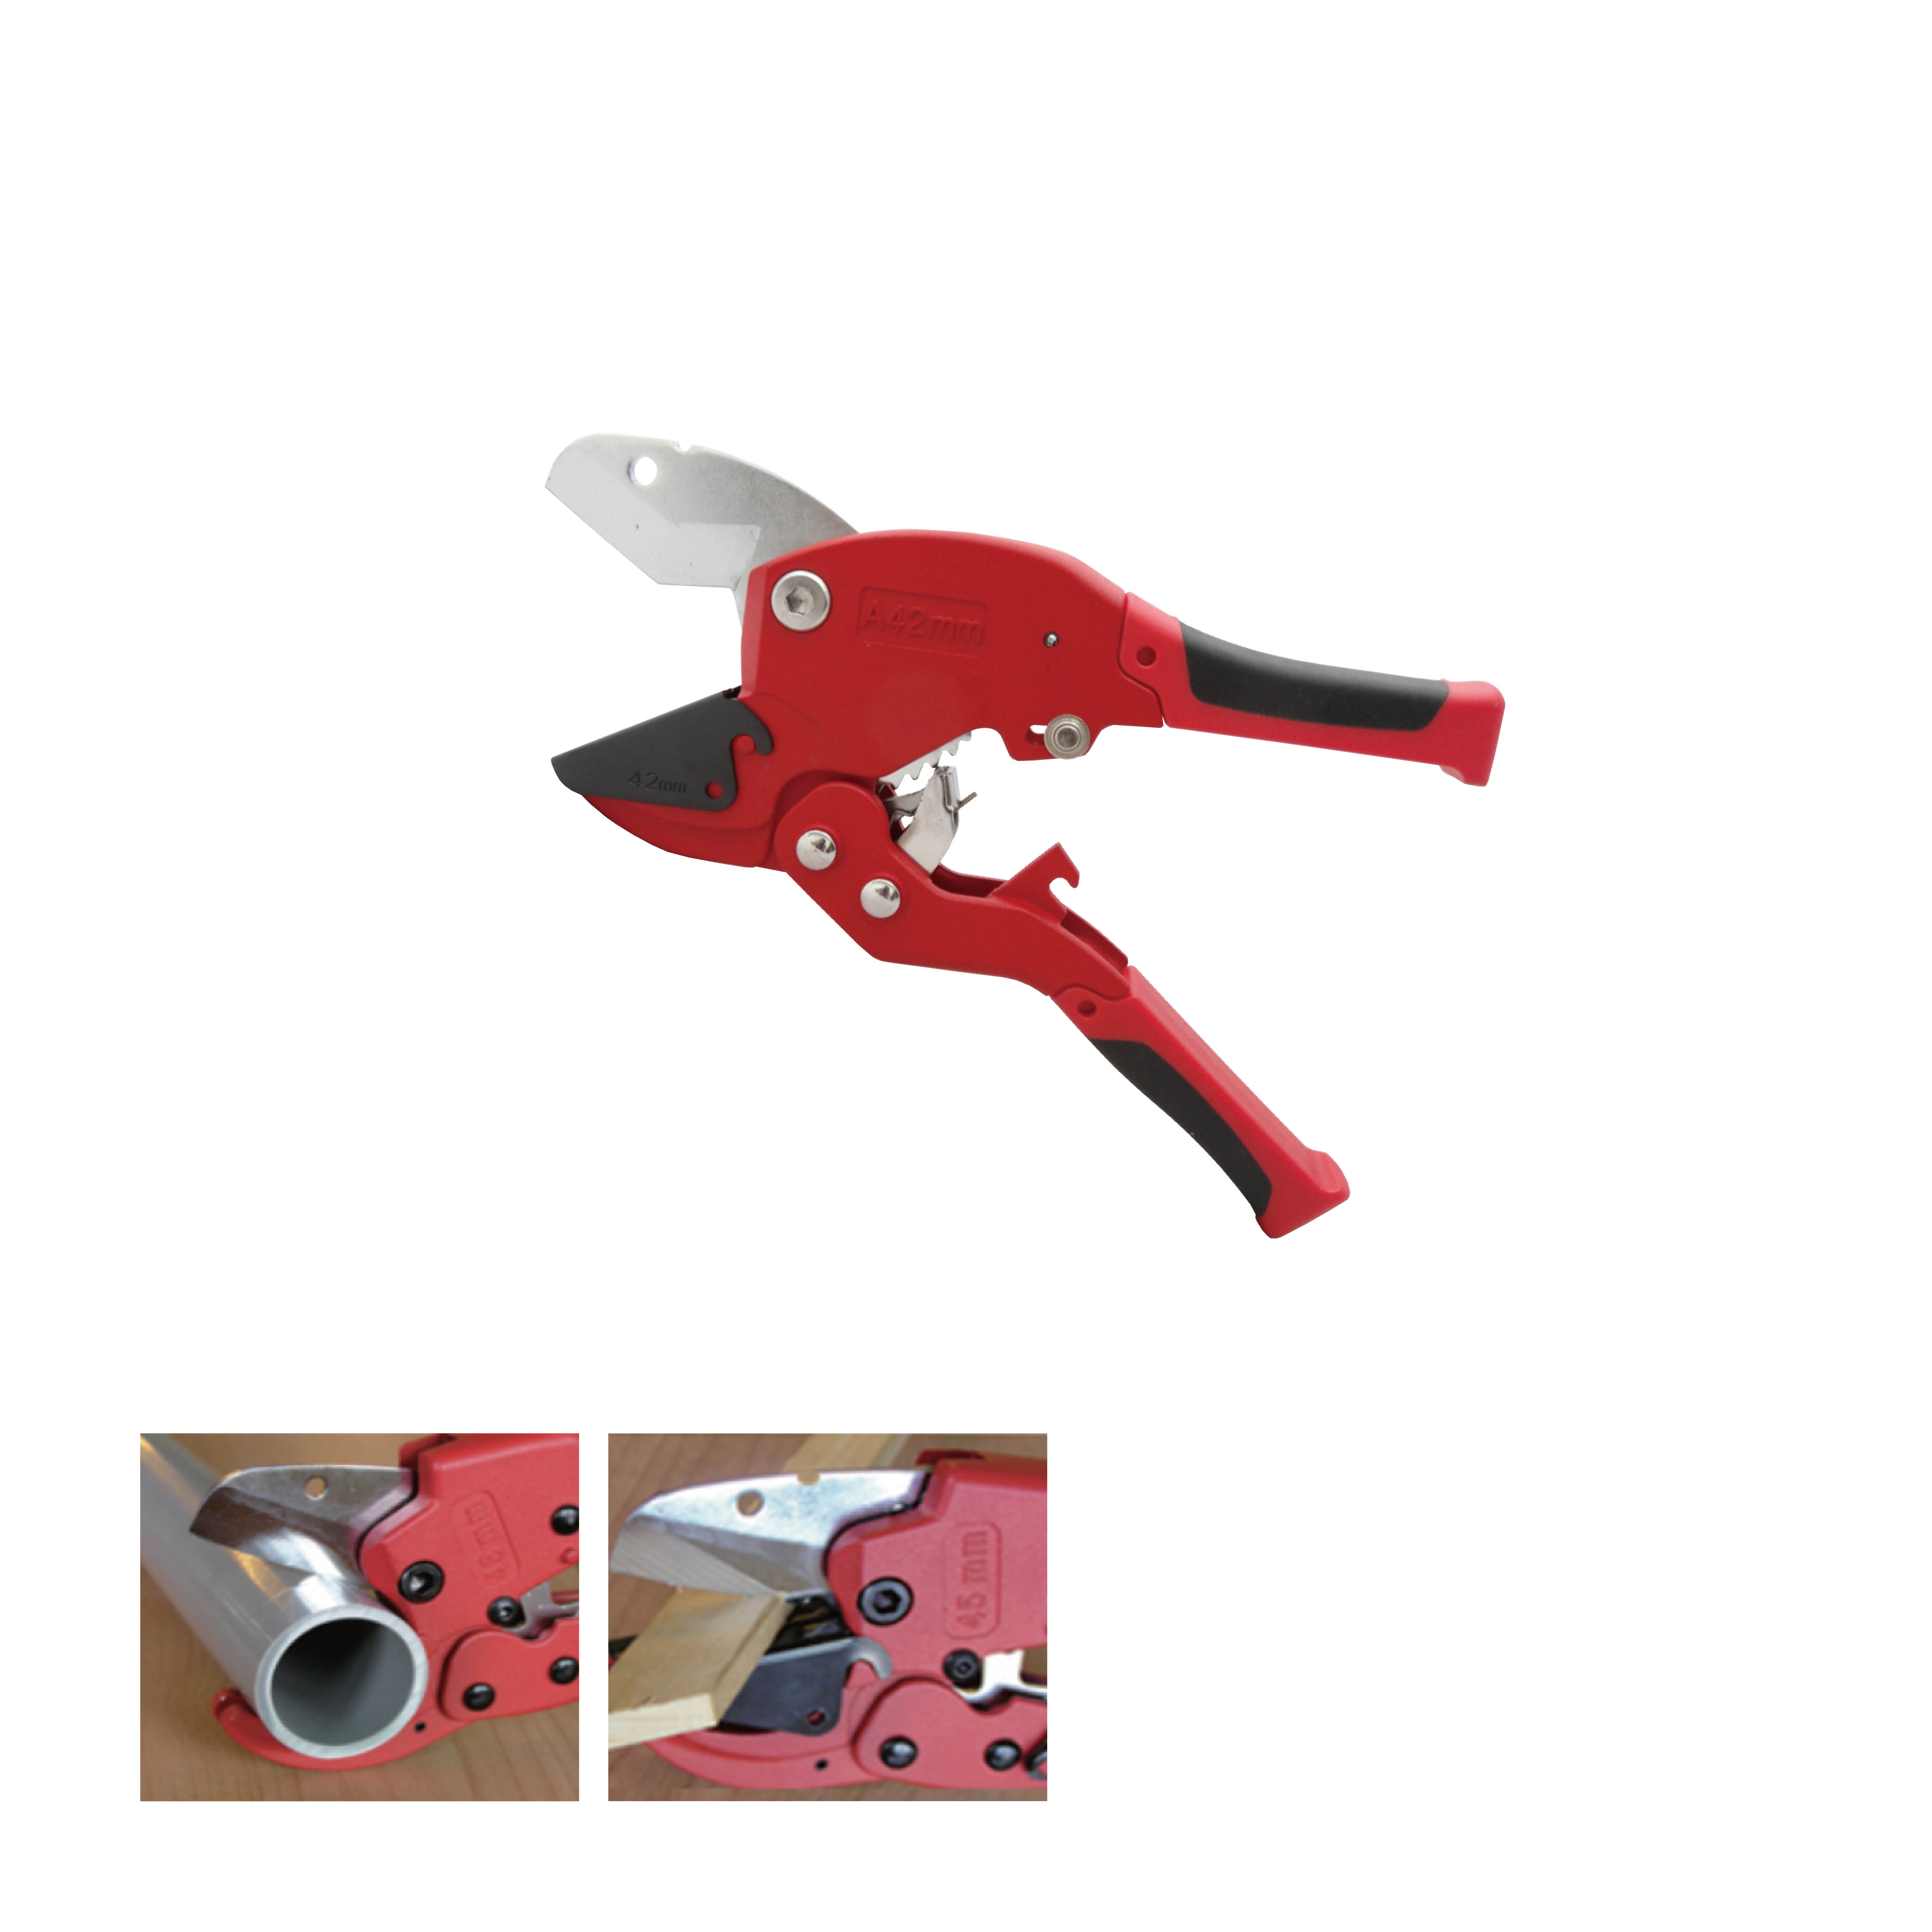 PVC pipe and wire-duct cutters